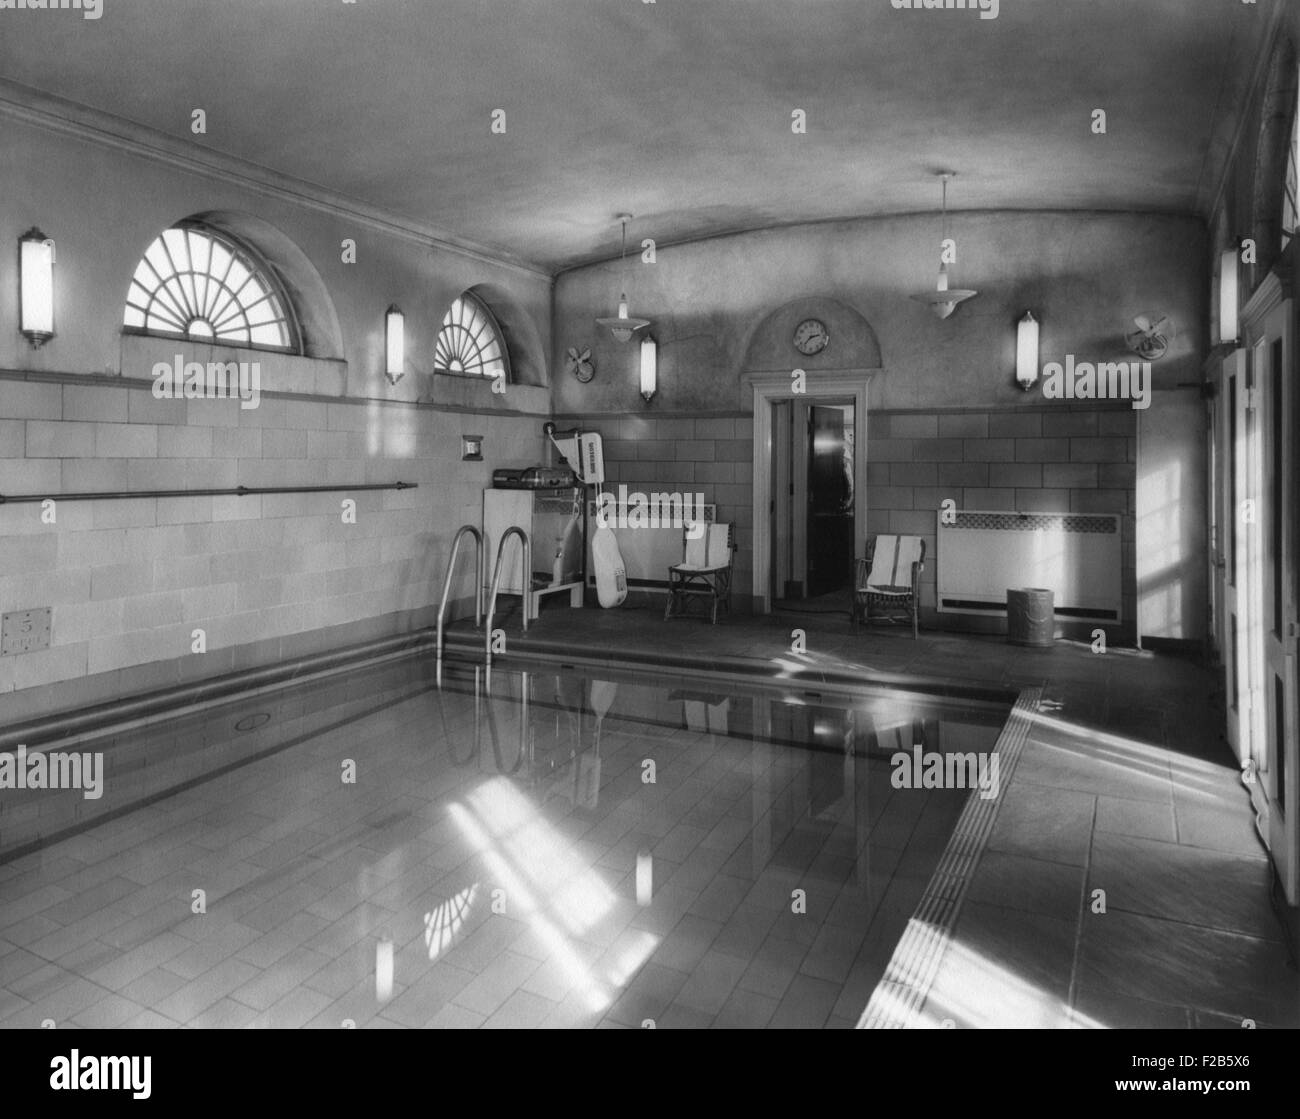 White House swimming pool during the Eisenhower administration. Jan. 27, 1956. It was installed in 1933 to allow the President Franklin Roosevelt to exercise regularly. JFK swam in a highly heated pool for his bad back. Richard Nixon converted it into a Press Room. - (BSLOC 2014 16 243) Stock Photo